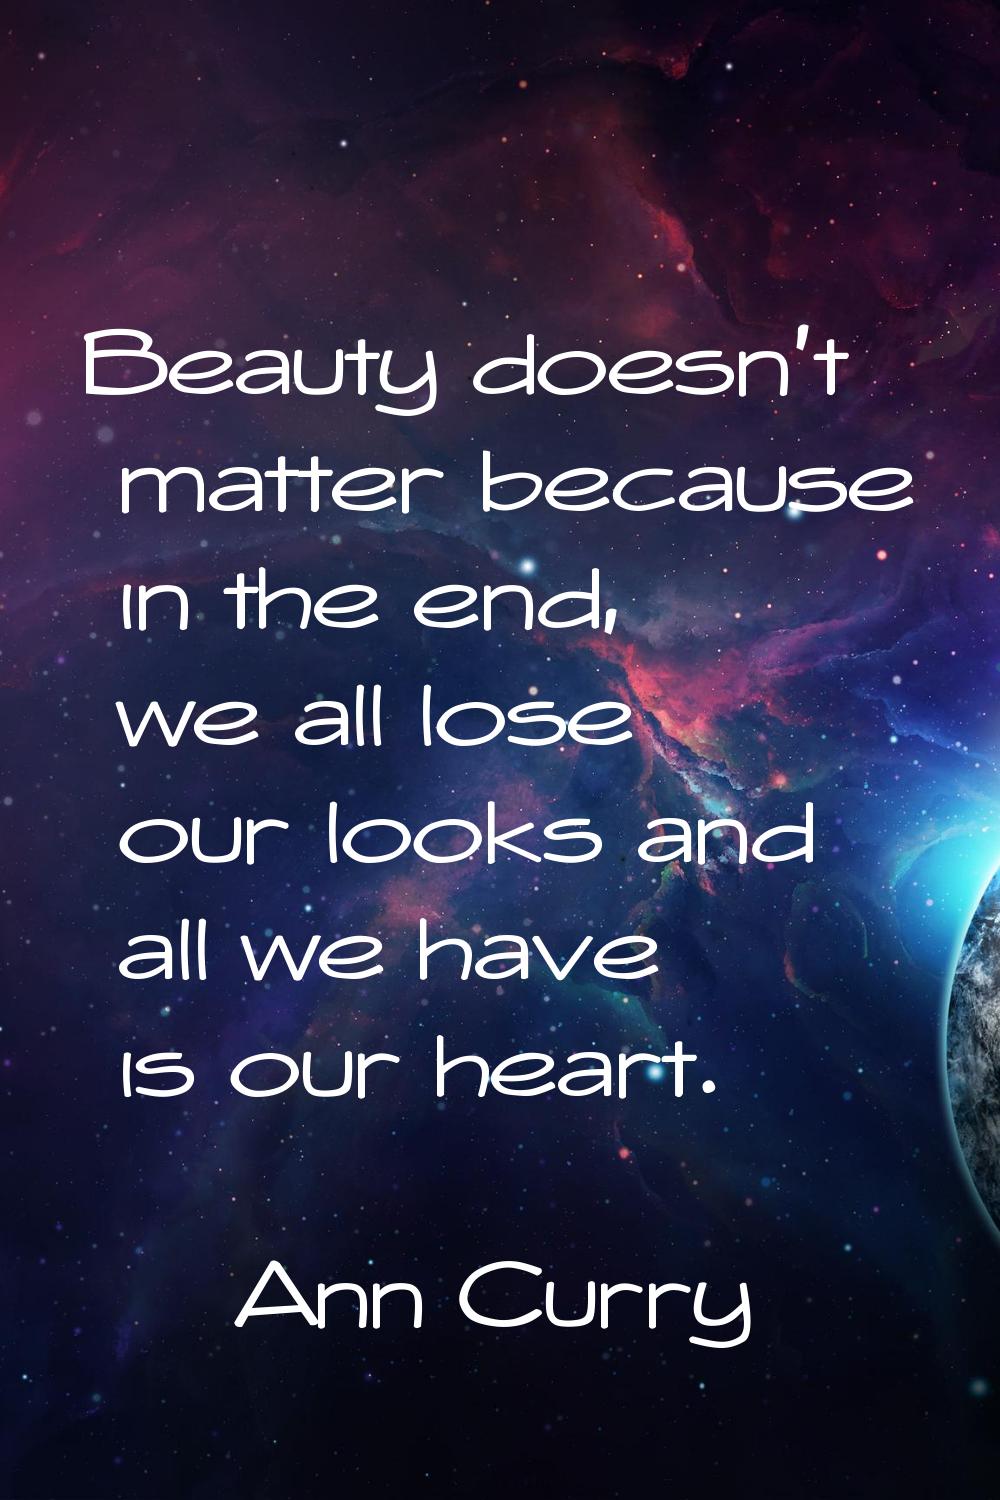 Beauty doesn't matter because in the end, we all lose our looks and all we have is our heart.